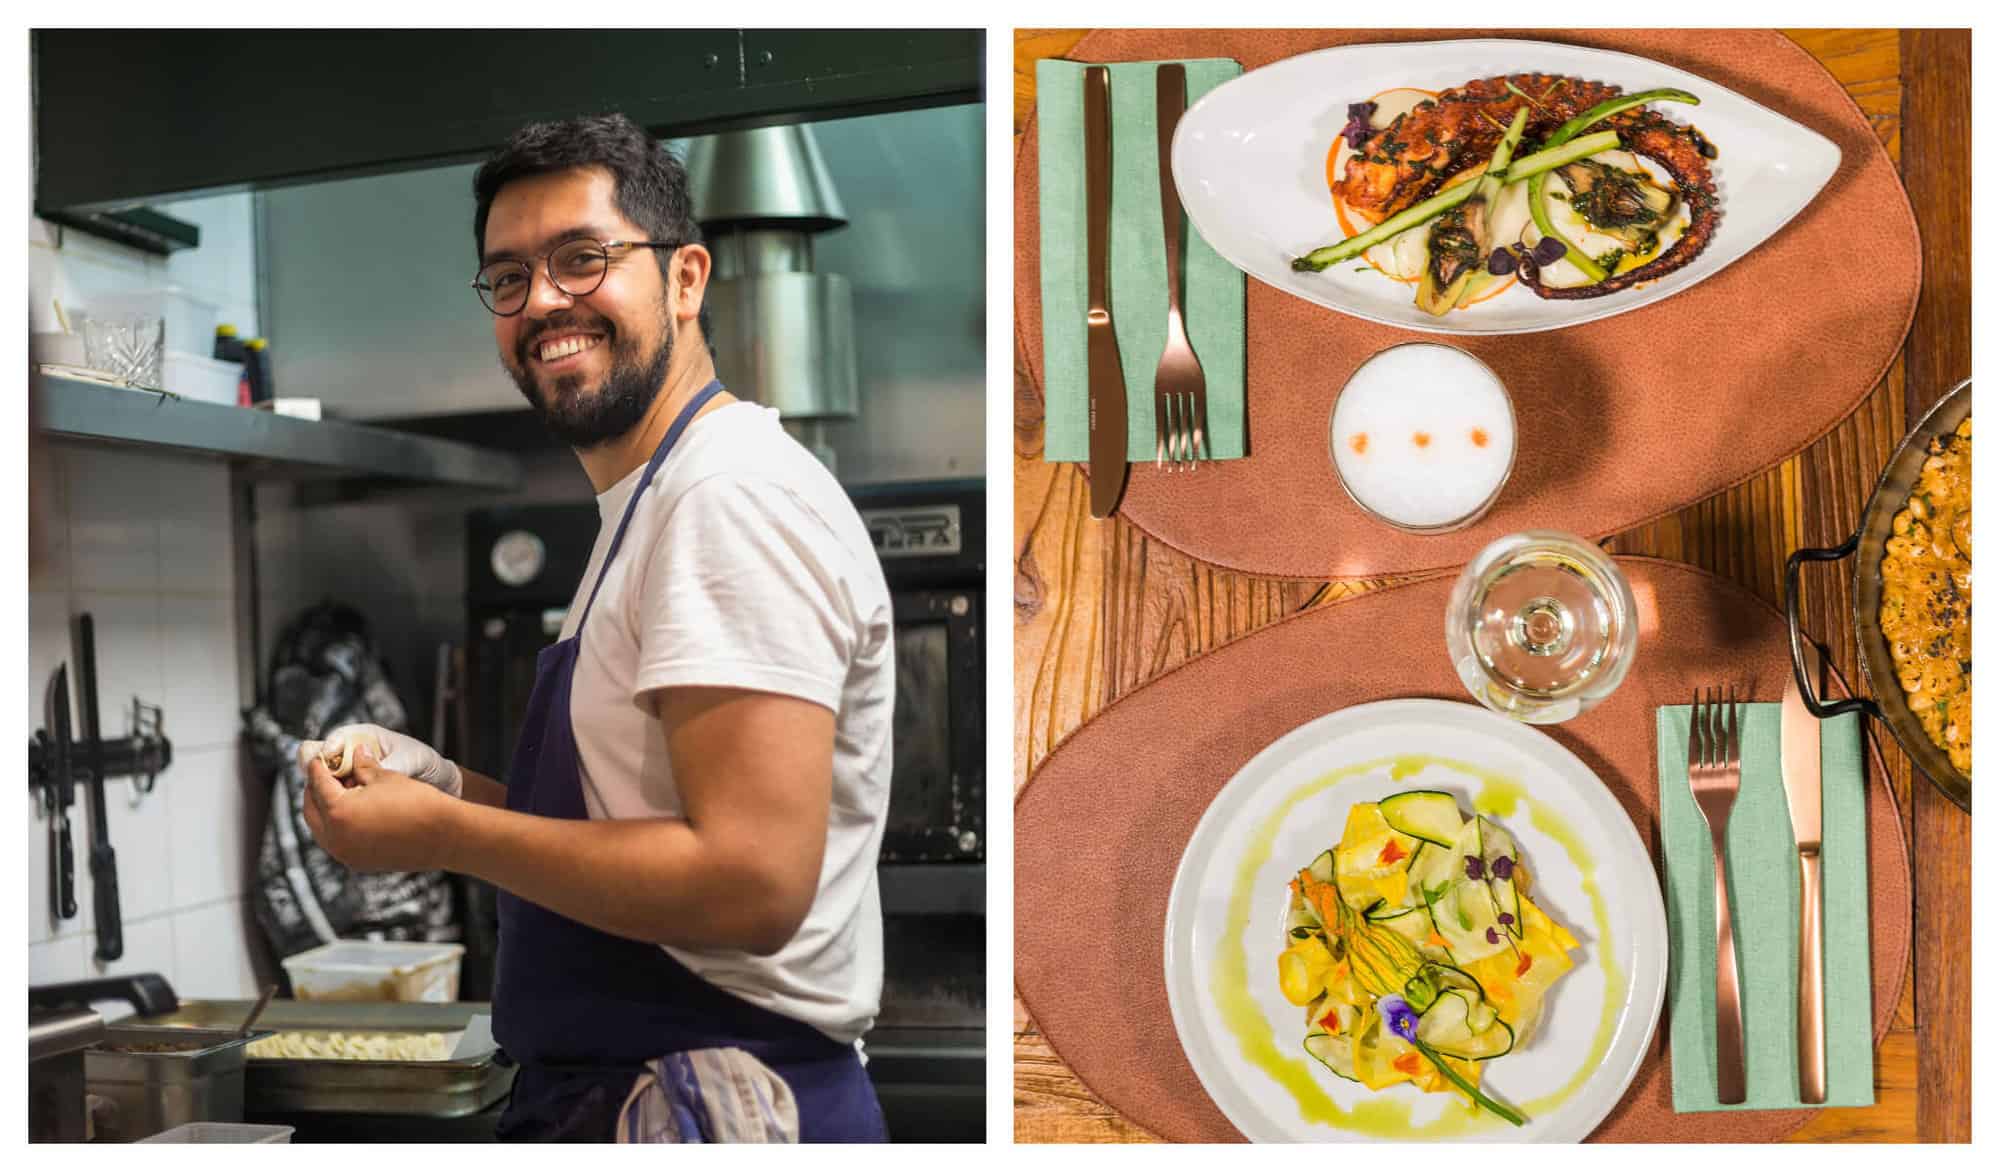 Left: Selva chef Felipe Camargo smiles while at work in his blue apron. Right: A table with two plates of food from Selva, golden cutlery, white cocktail, and white wine.